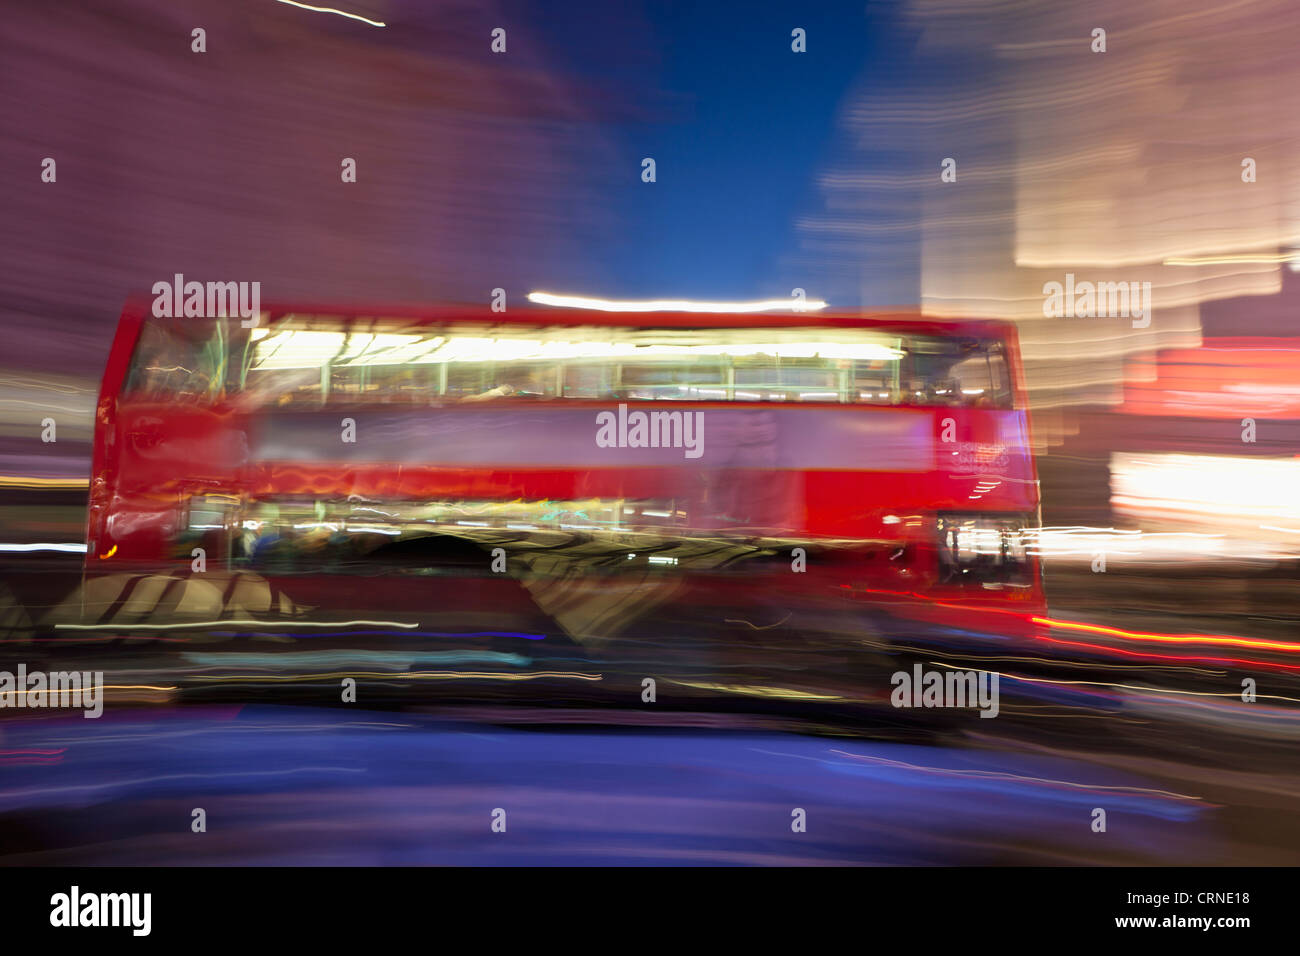 Blurry red bus, London, England Stock Photo